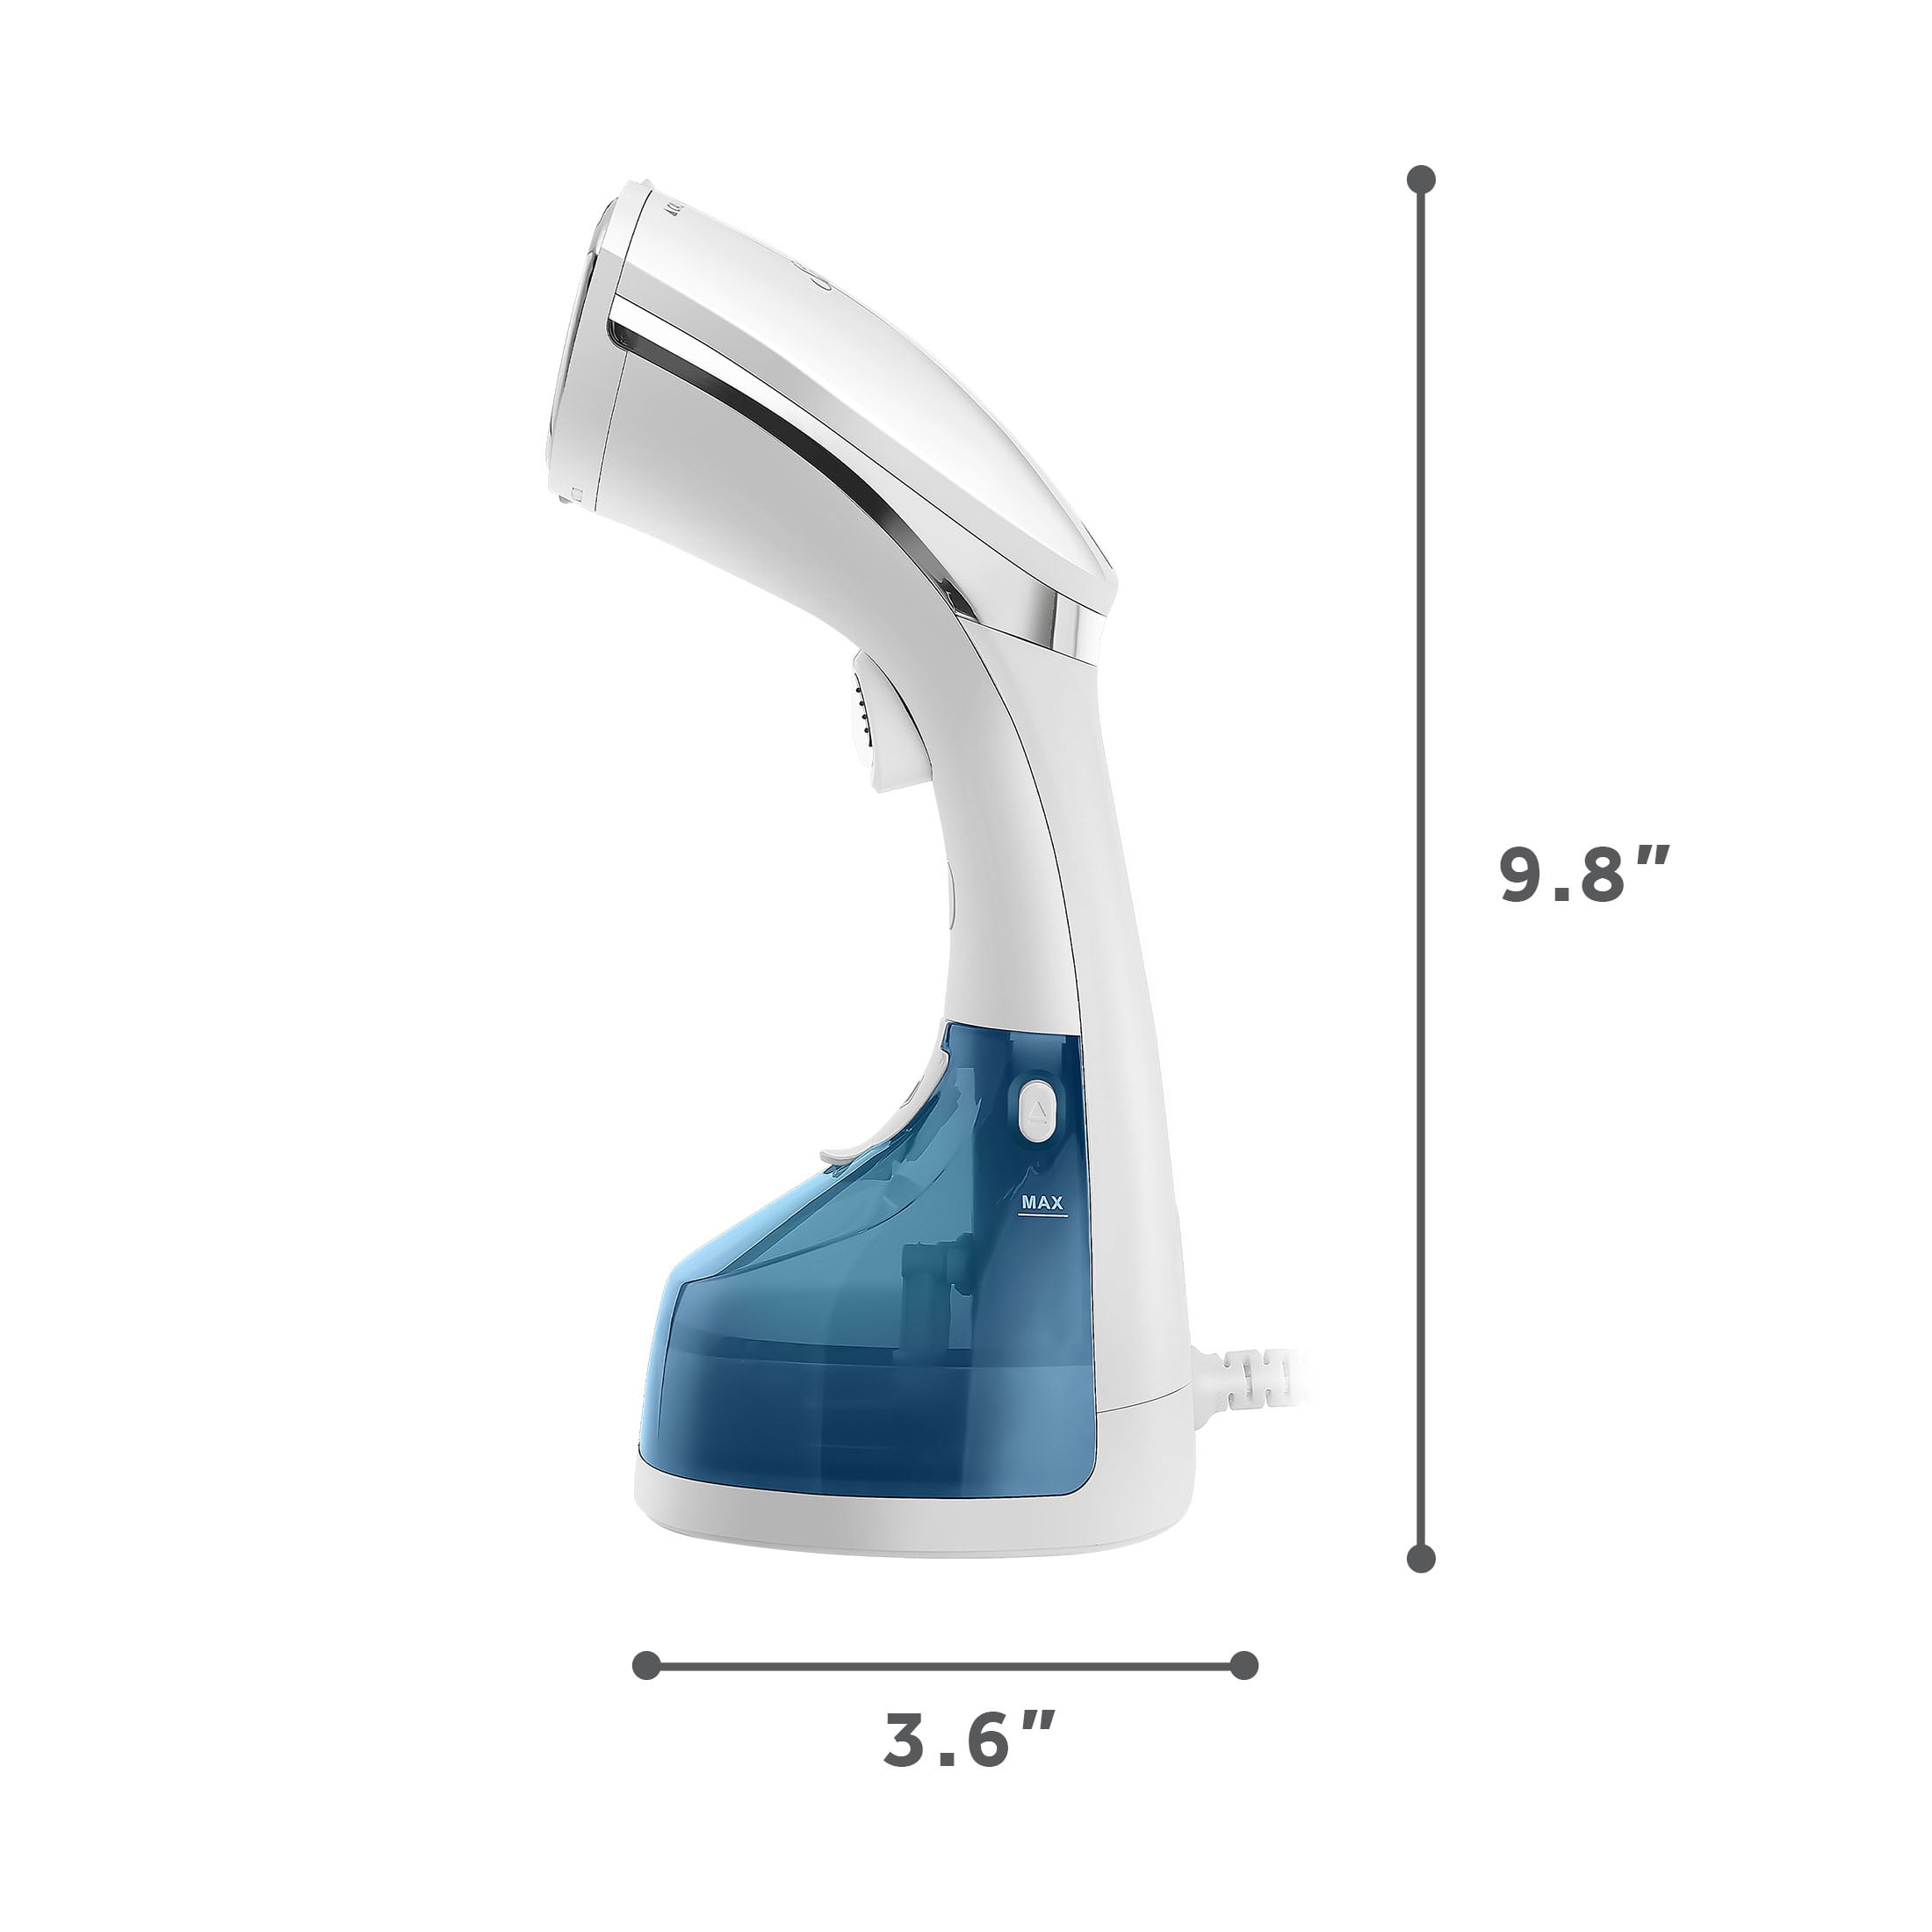  Sunbeam 1200W Steam Burst Handheld Steamer for Clothes, Dual  Steam Settings, 30-Second Fast Head-Up, Bristle Brush Attachment, White and  Blue Finish: Paintings